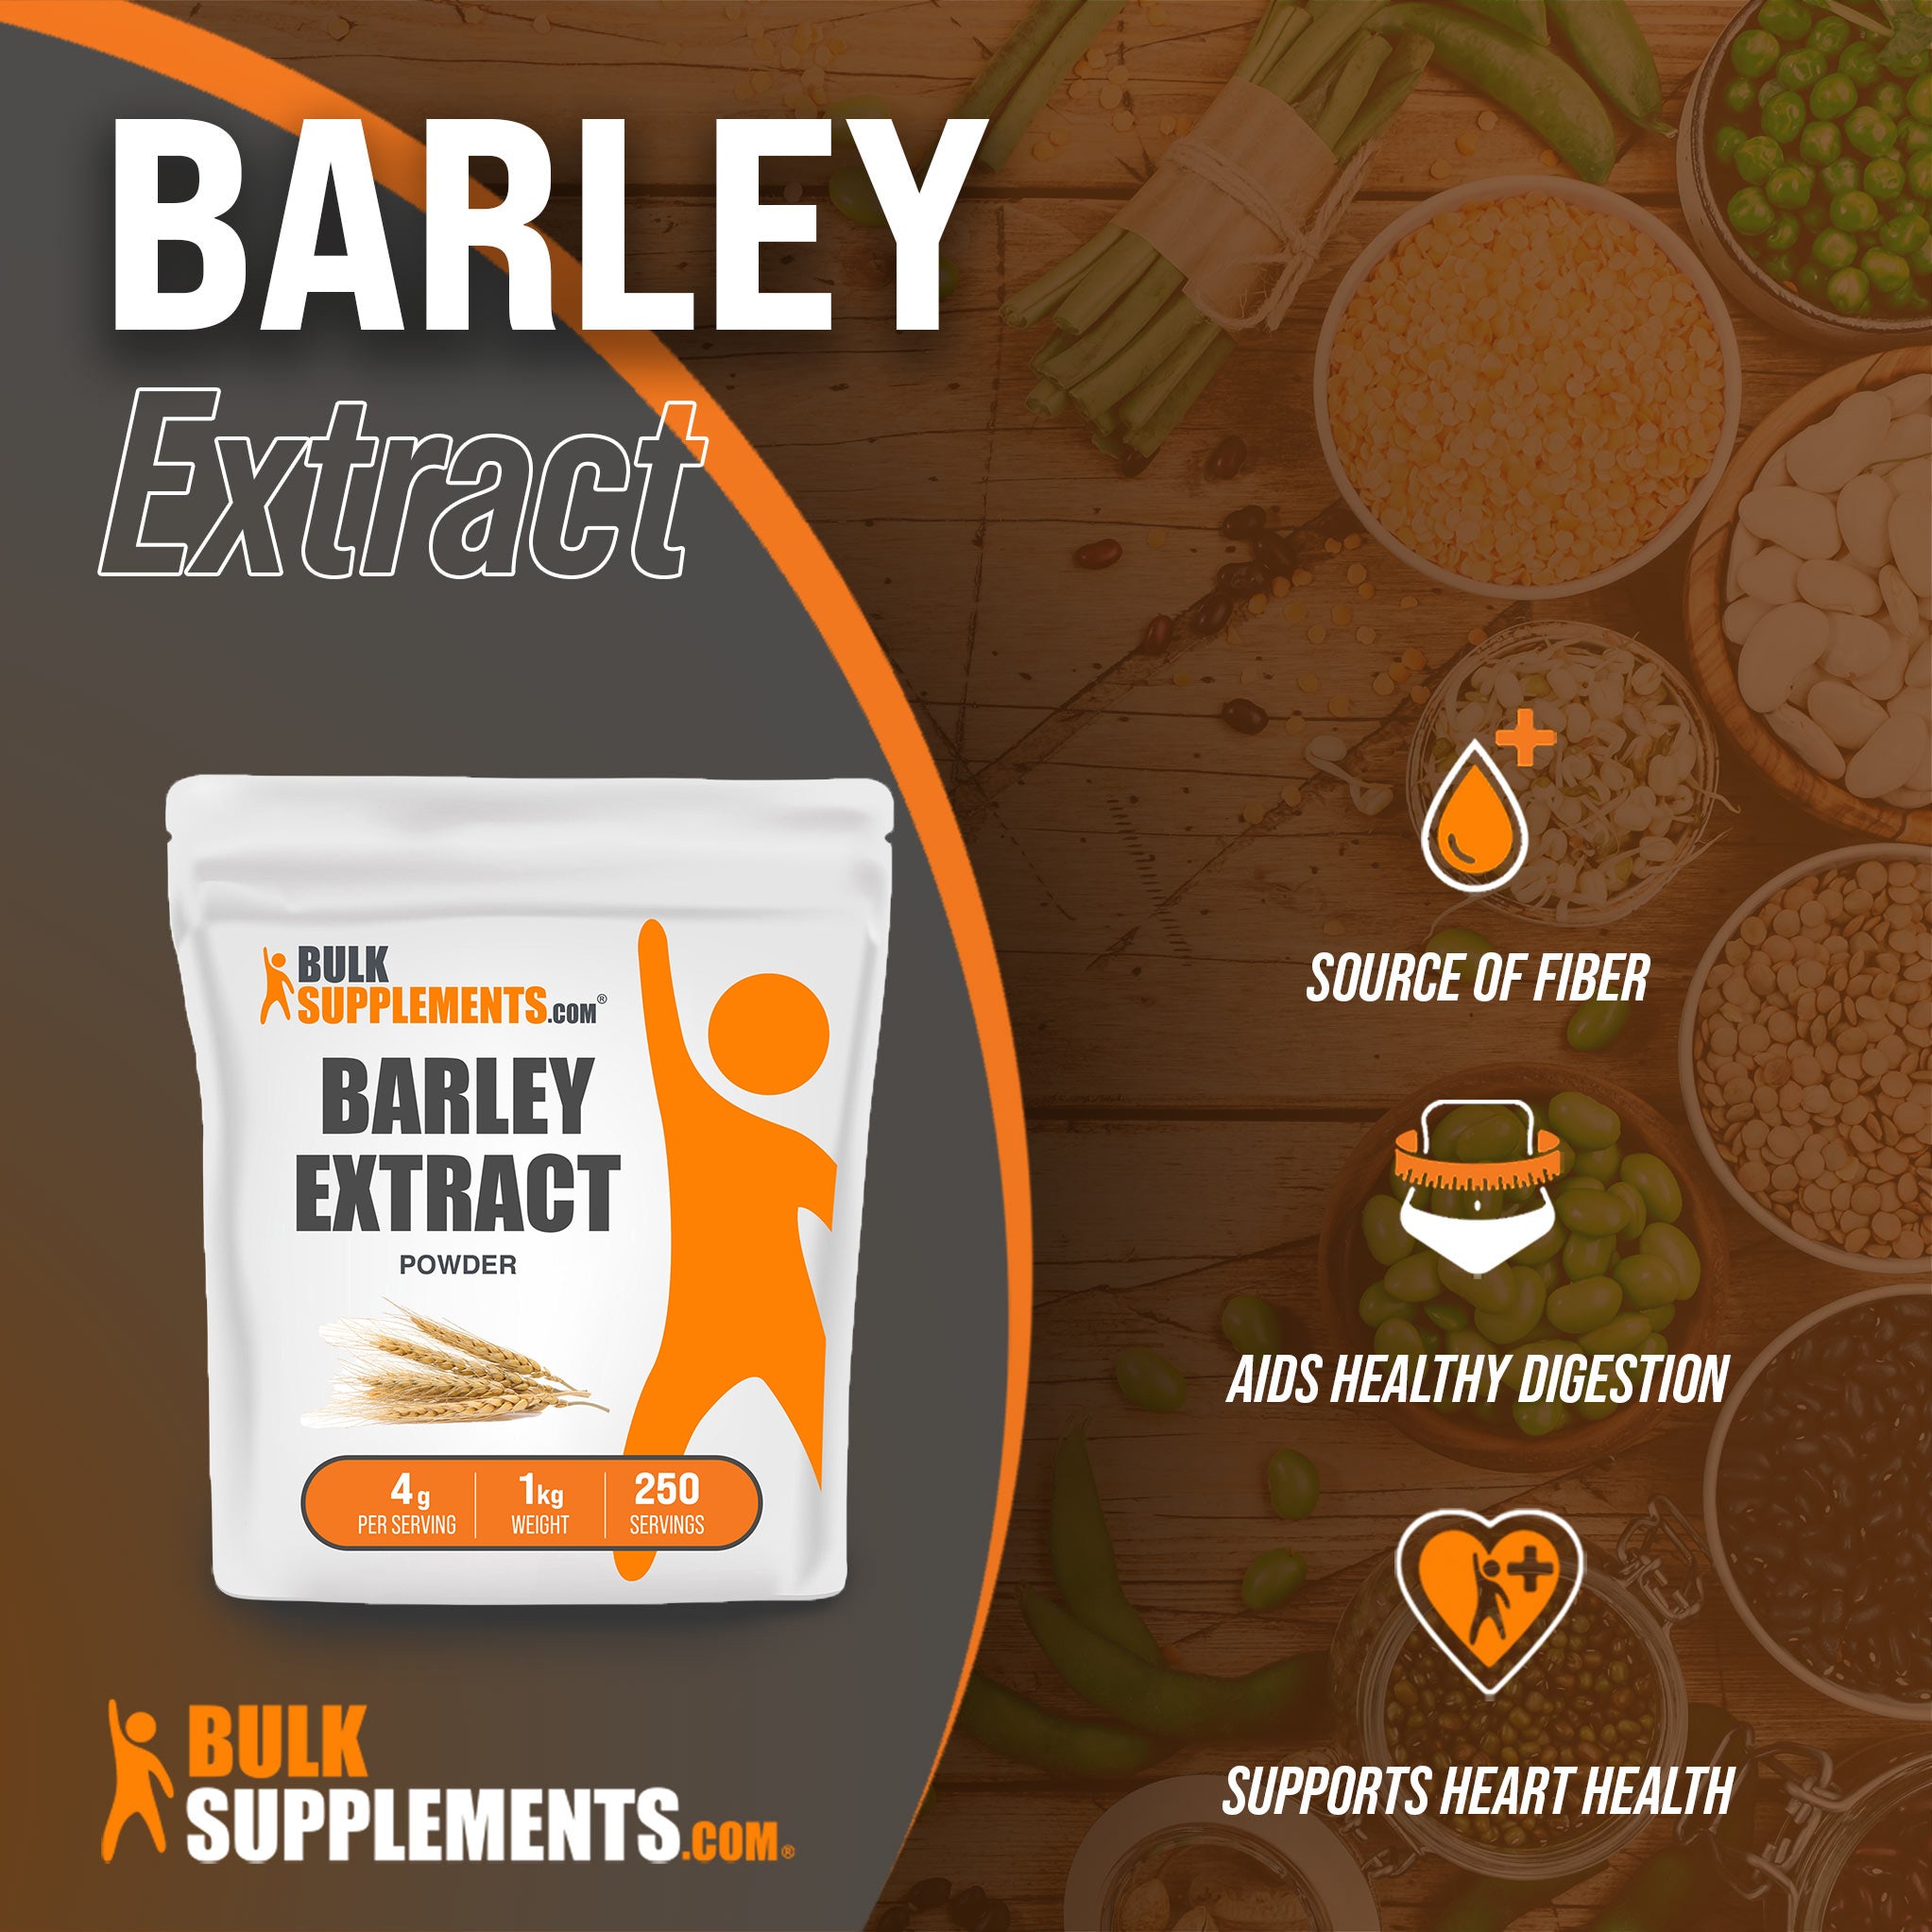 Barley Extract Powder from Bulk Supplements for a great source of fiber